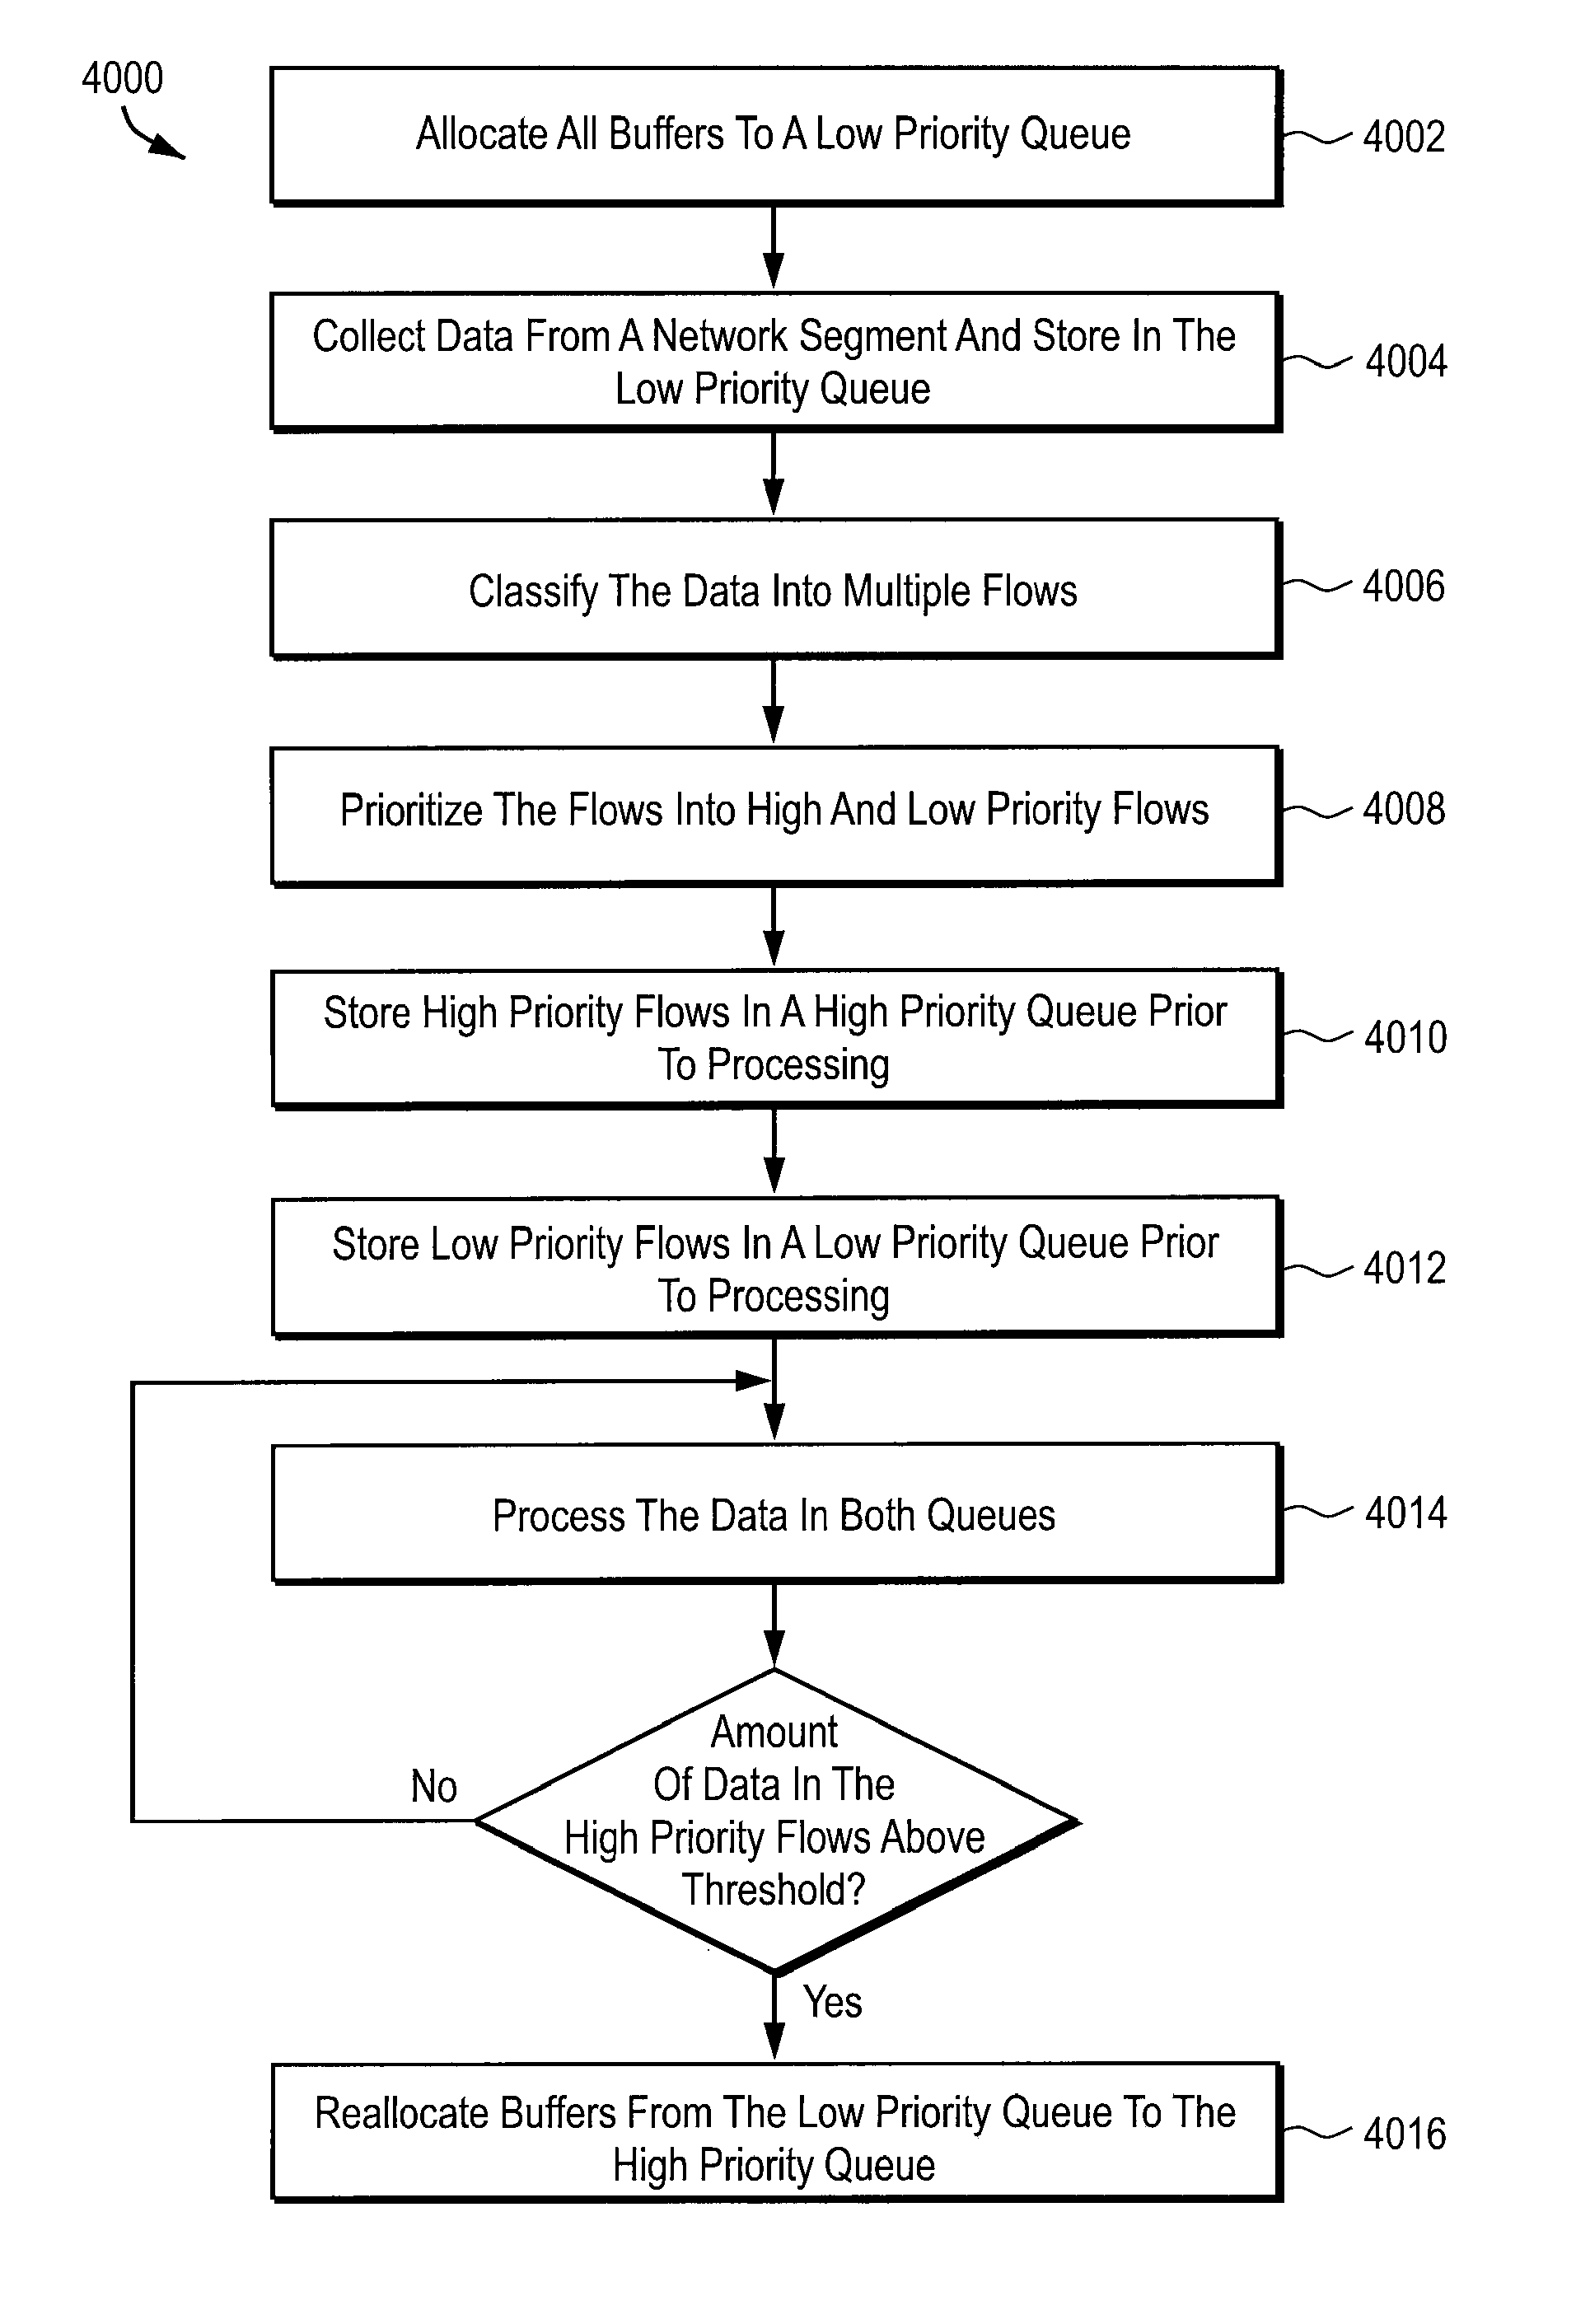 Media module apparatus and method for use in a network monitoring environment